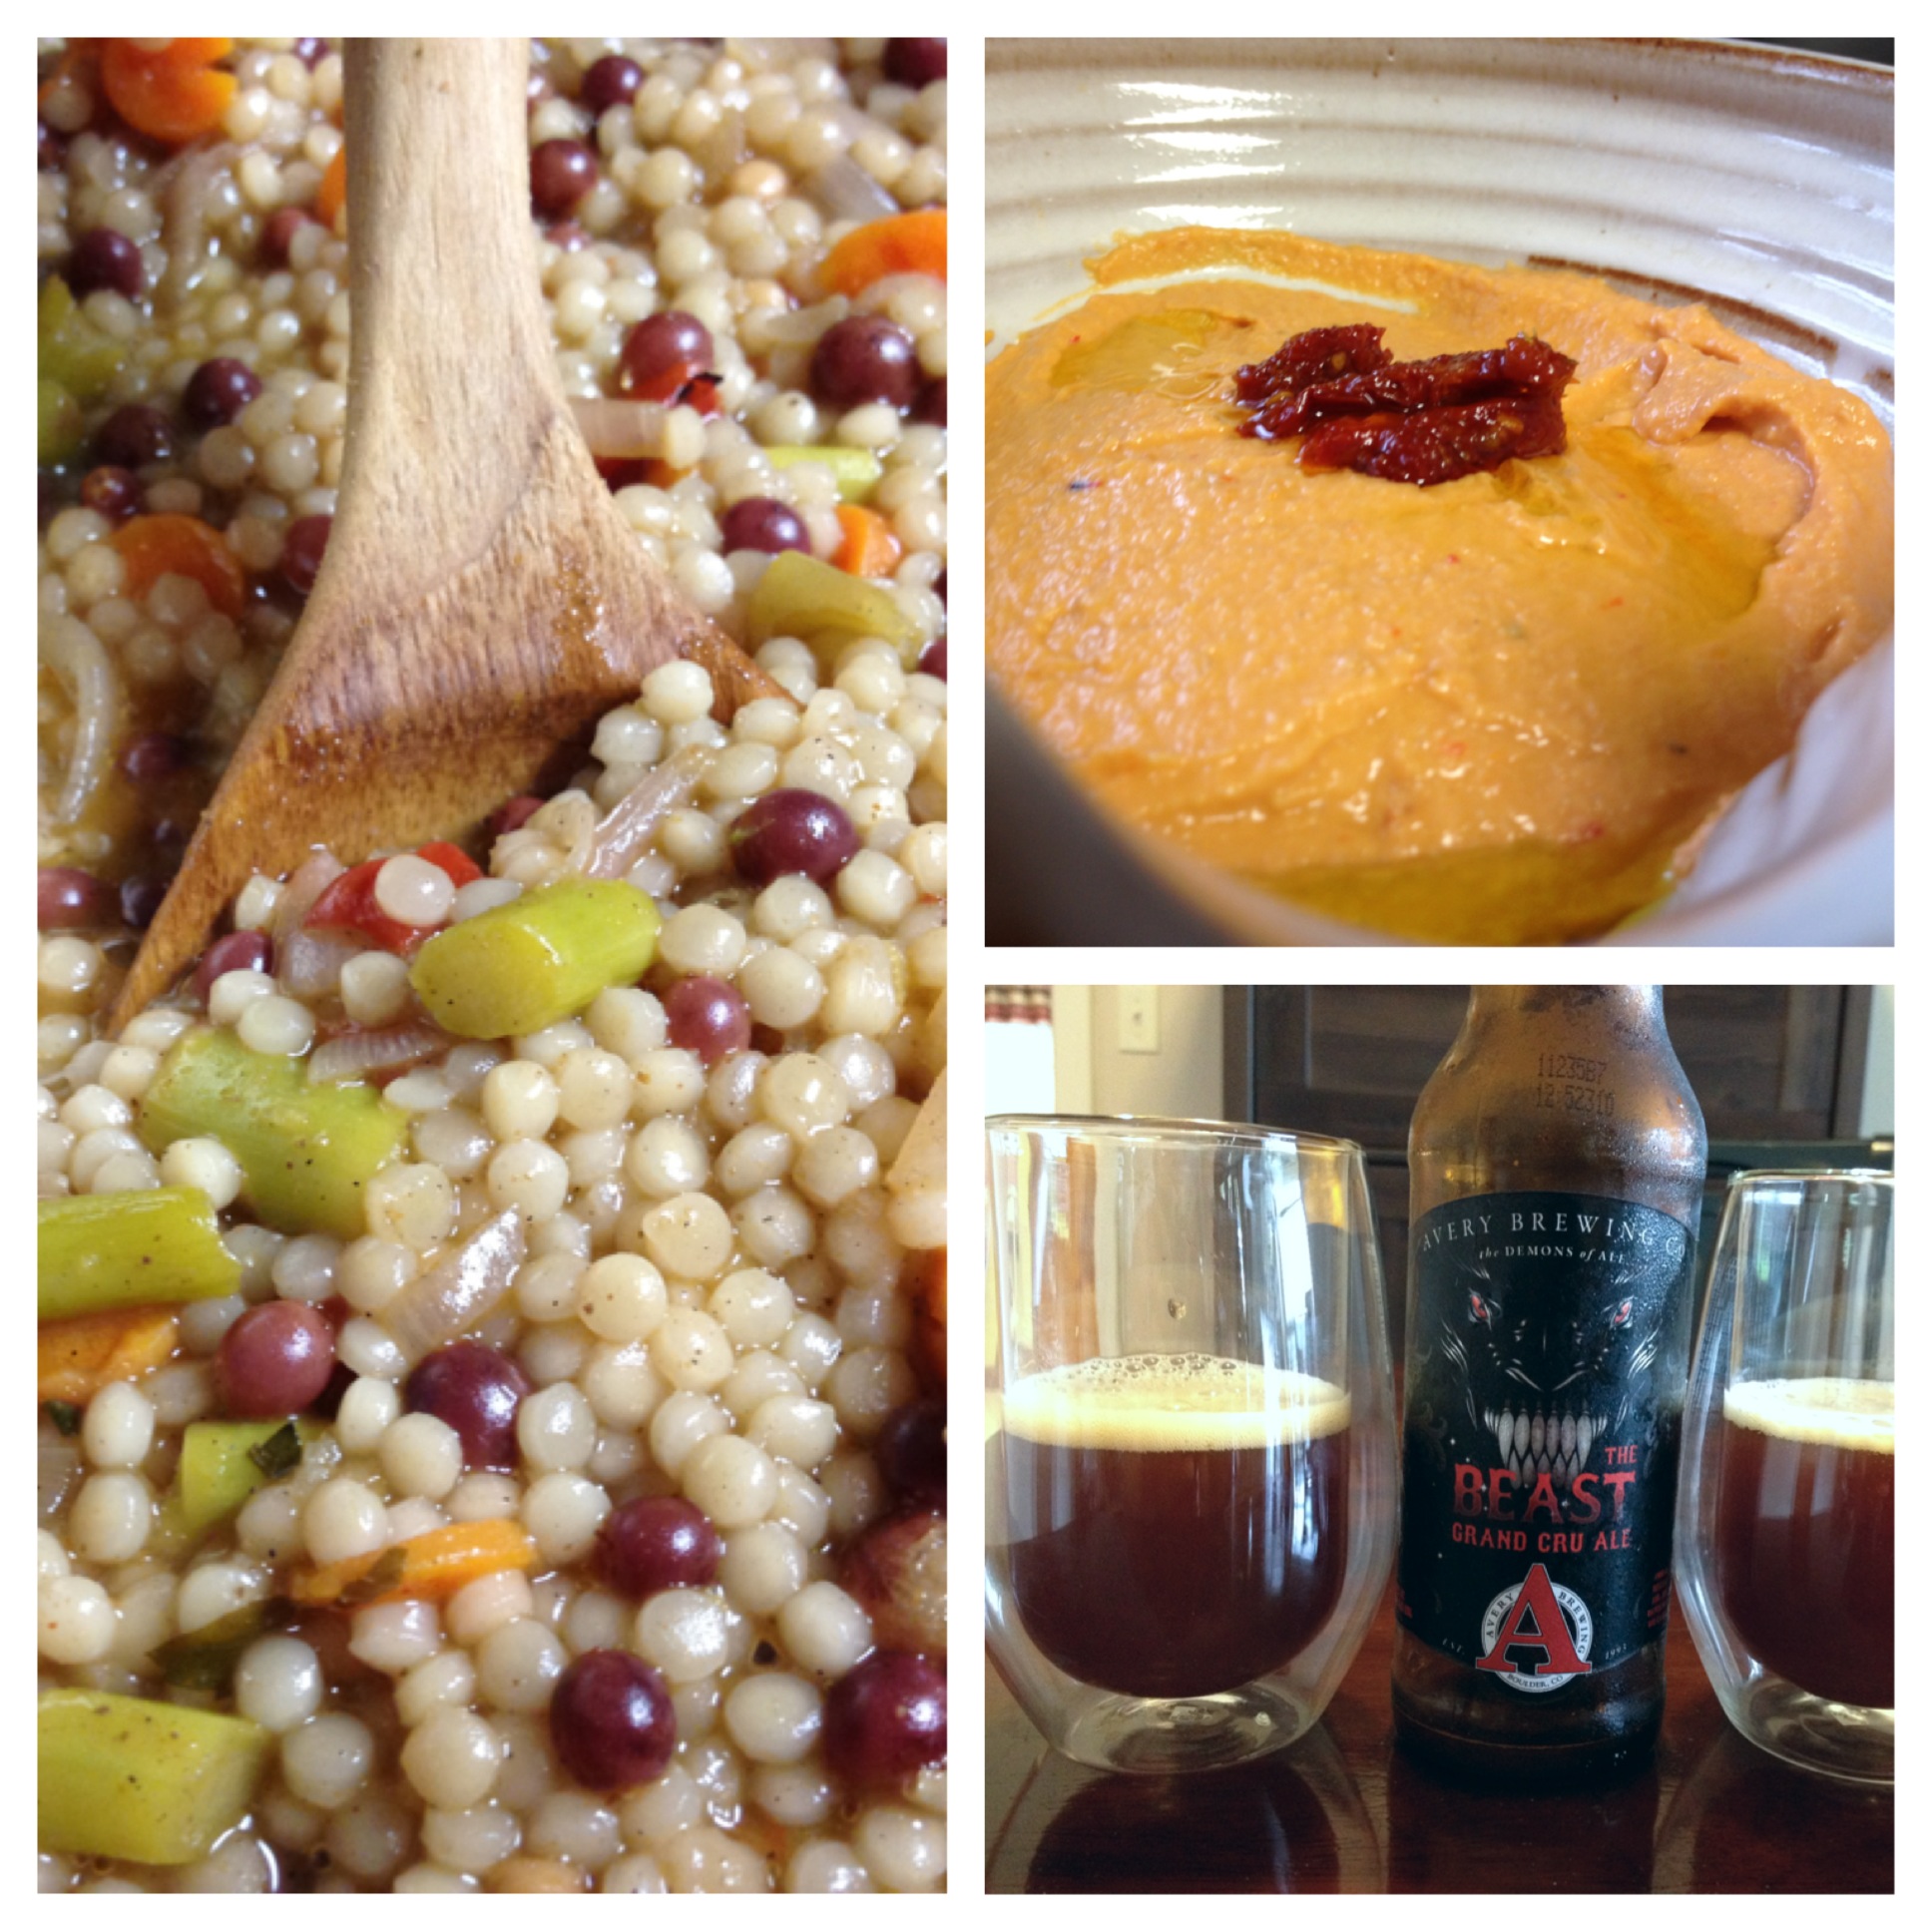 Couscous, red pepper and sundried tomato hummus, avery beast beer